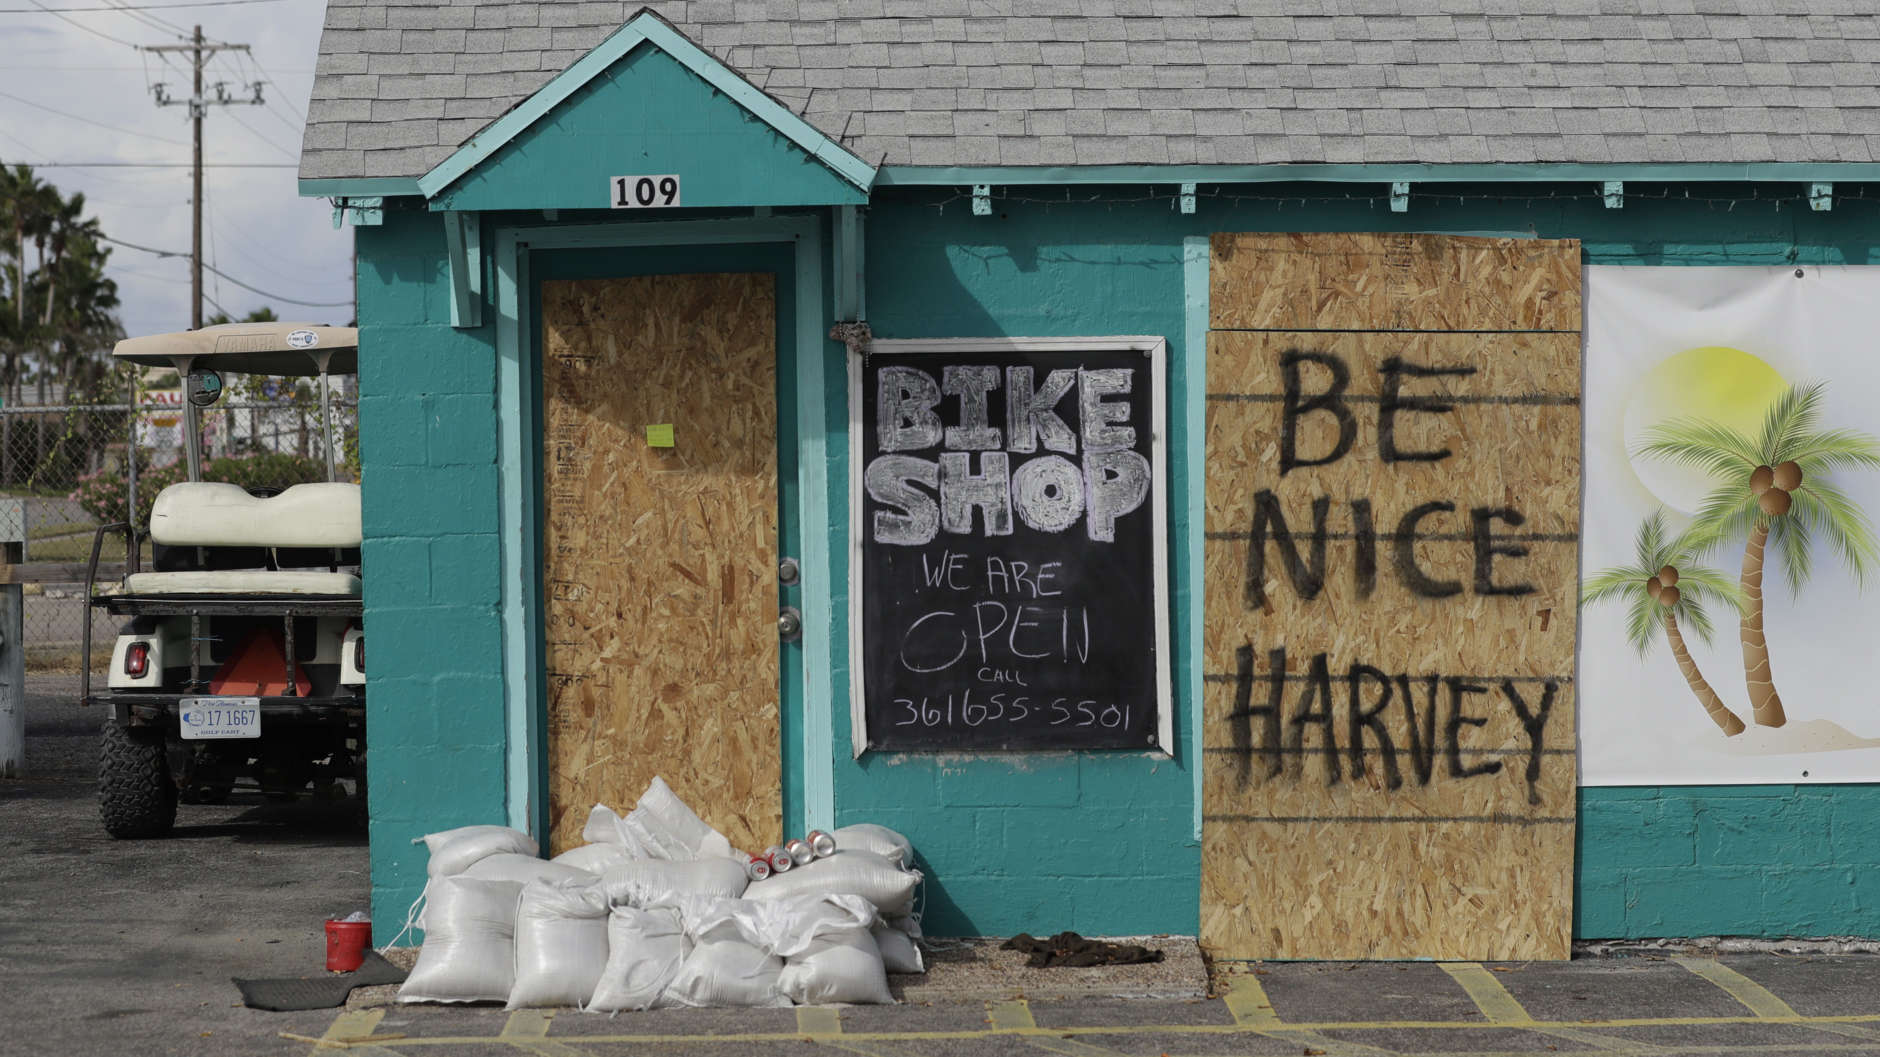 A sign reading "Be Nice Harvey" was left behind on a boarded up business, Thursday, Aug. 24, 2017, in Port Aransas, Texas. Port Aransas is under a mandatory evacuation for Hurricane Harvey. (AP Photo/Eric Gay)